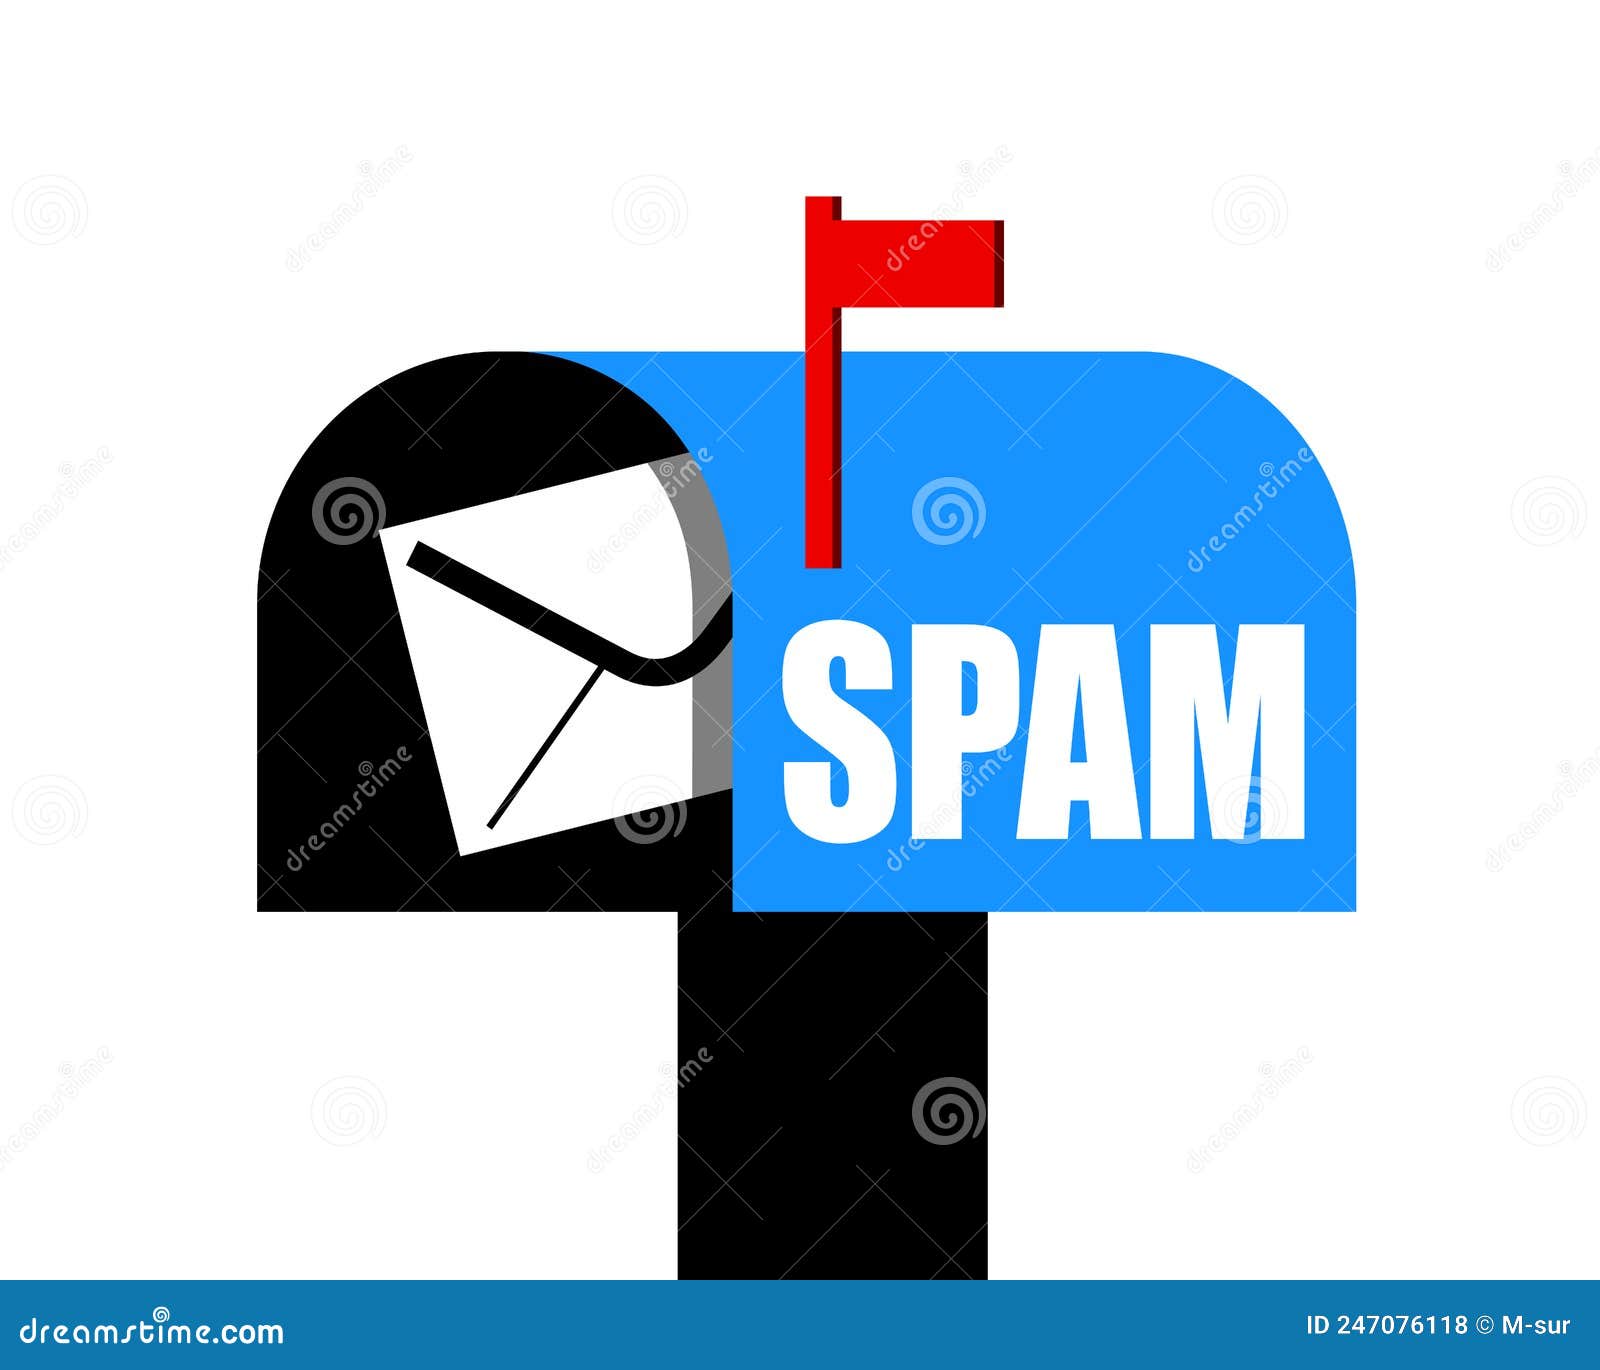 spam and unsolicited electronic message, mail, email and e-mail is delivered into mailbox, spam filter.